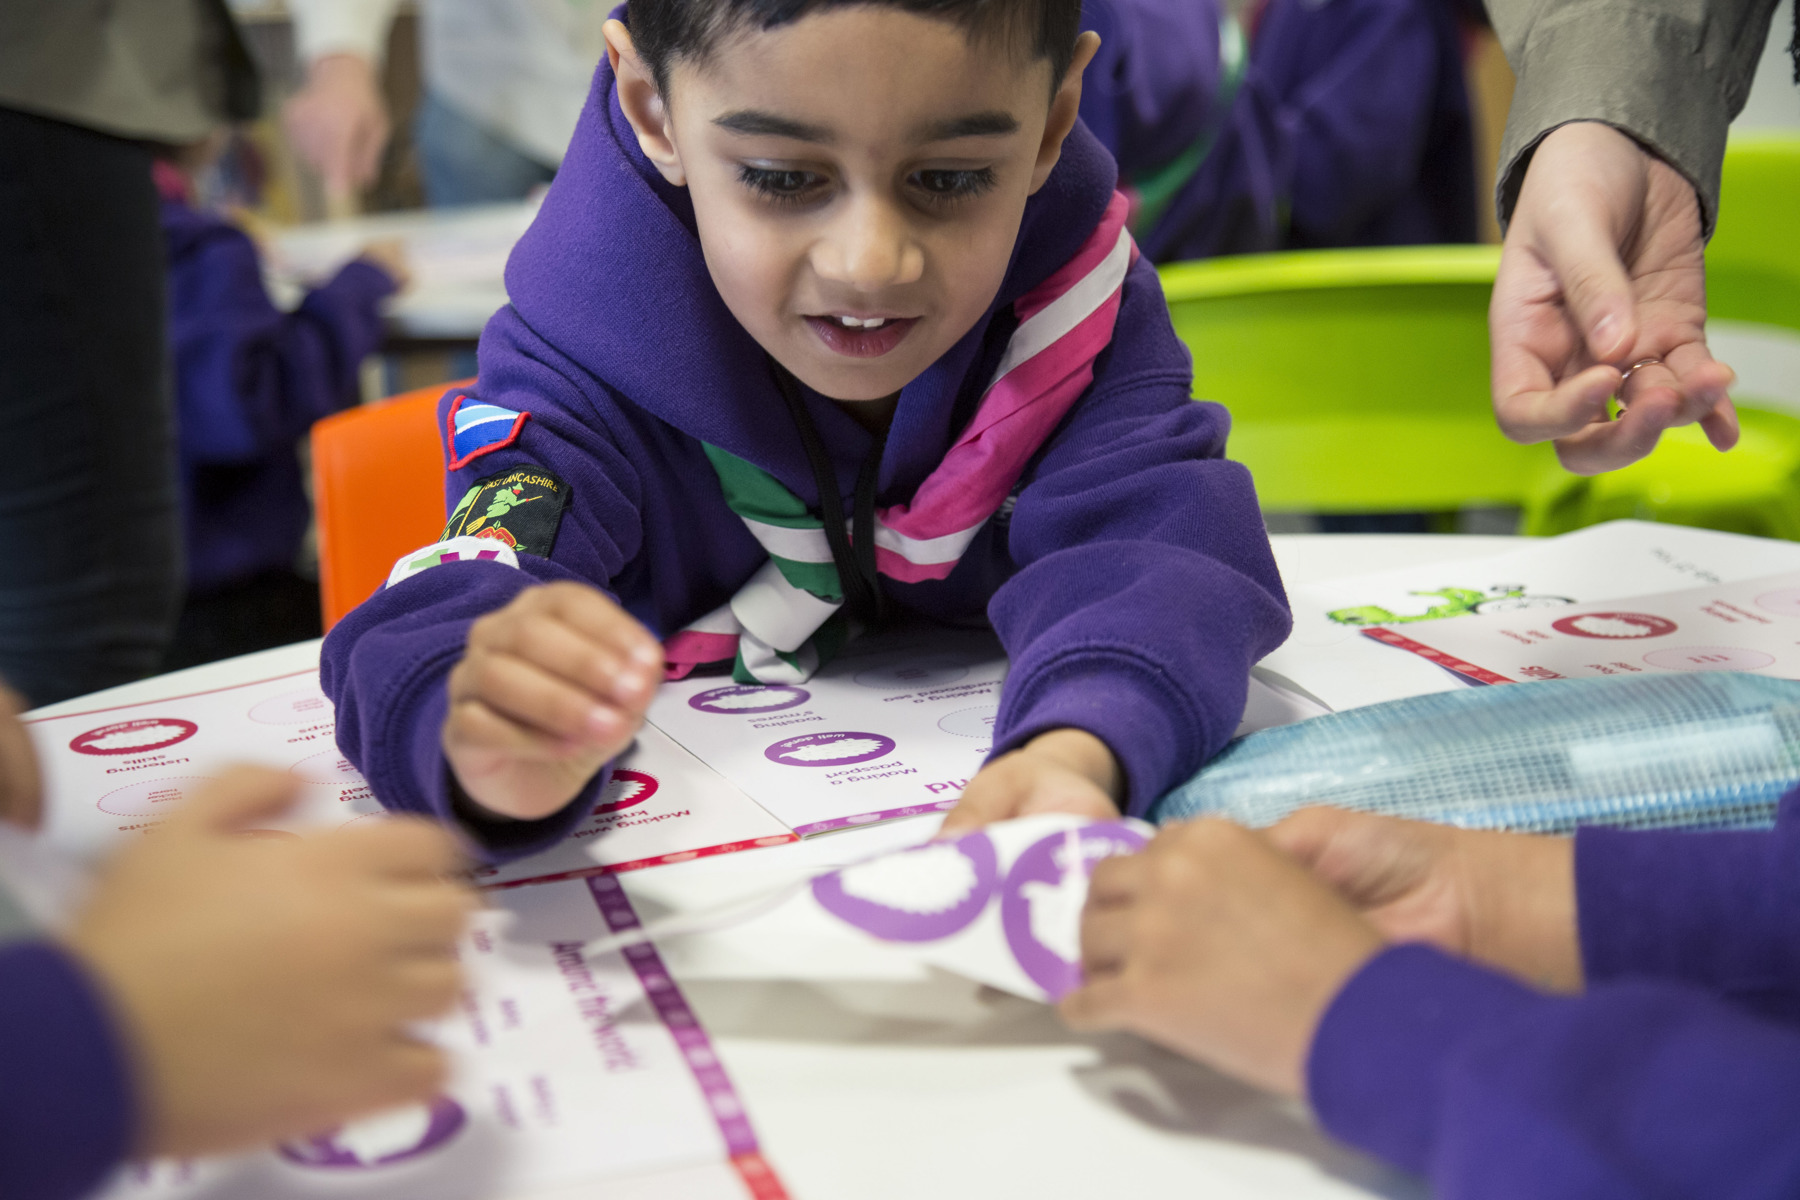 A young Scout boy is engaging in an activity, wearing a purple jumper and pink and green necker. He is leaning over the table while smiling to help put stickers onto a sheet.